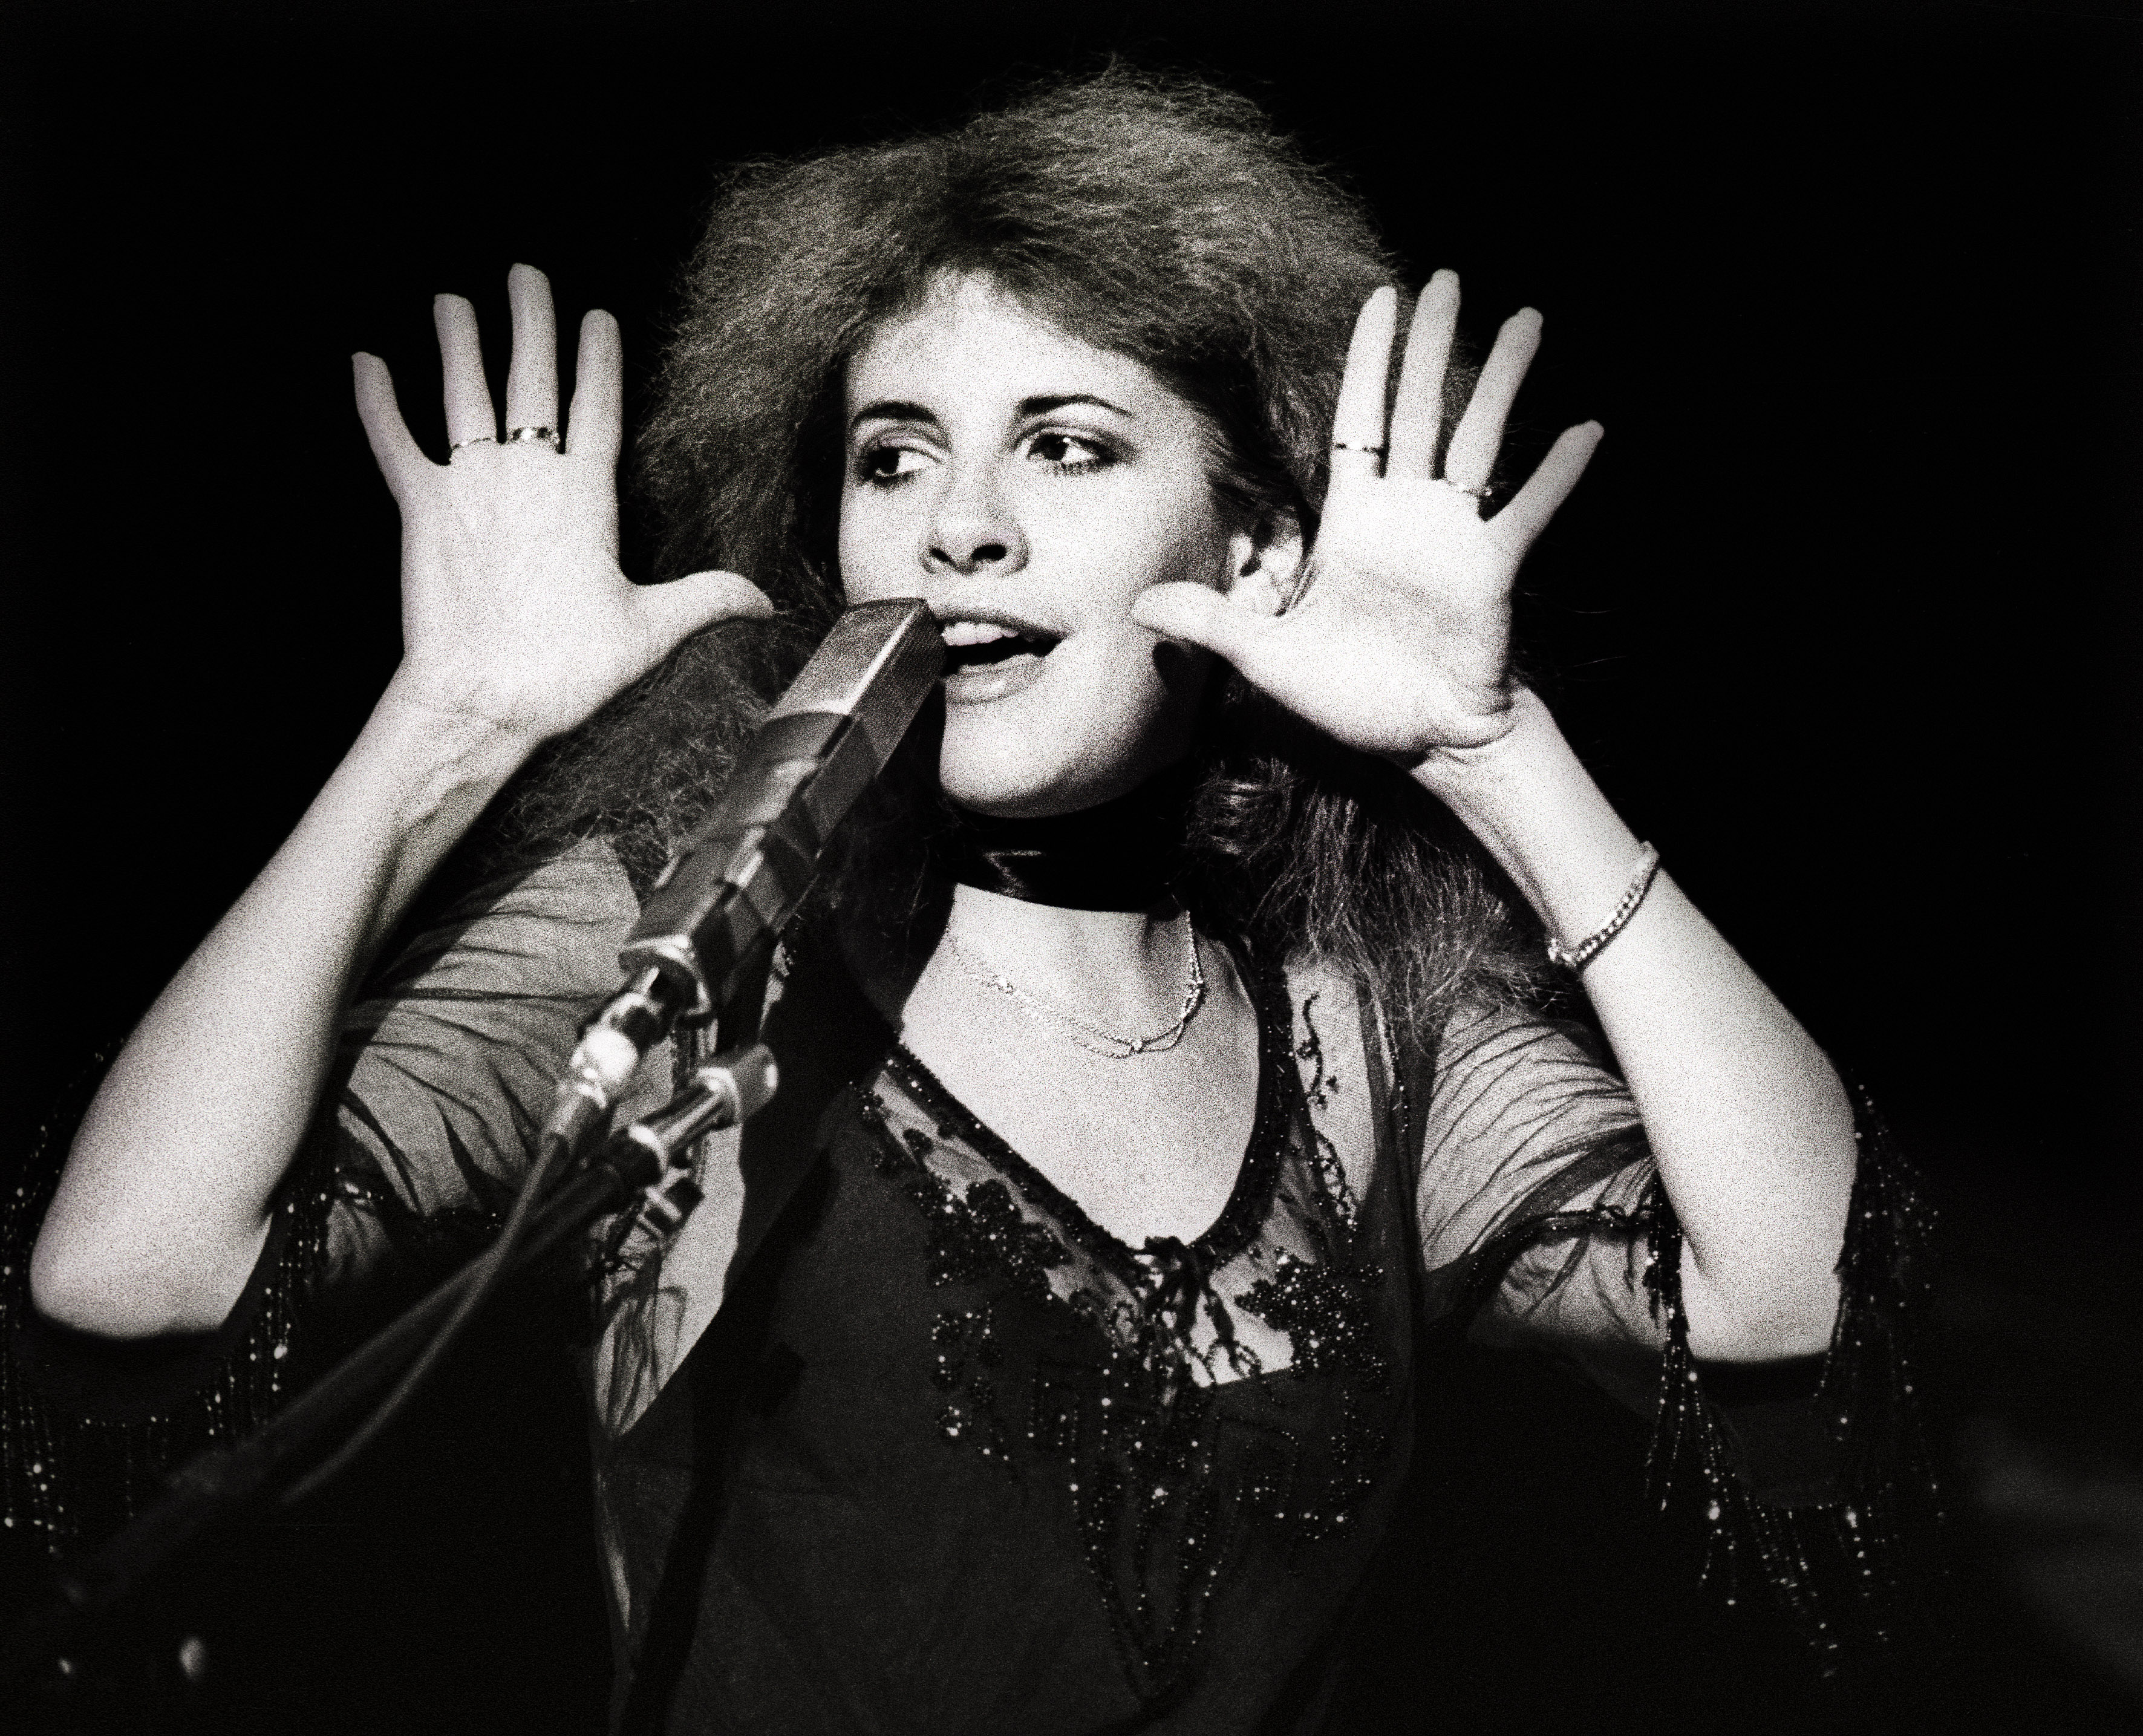 Stevie Nicks wears a black lace dress and holds her hands up by her face. She sings into a microphone.